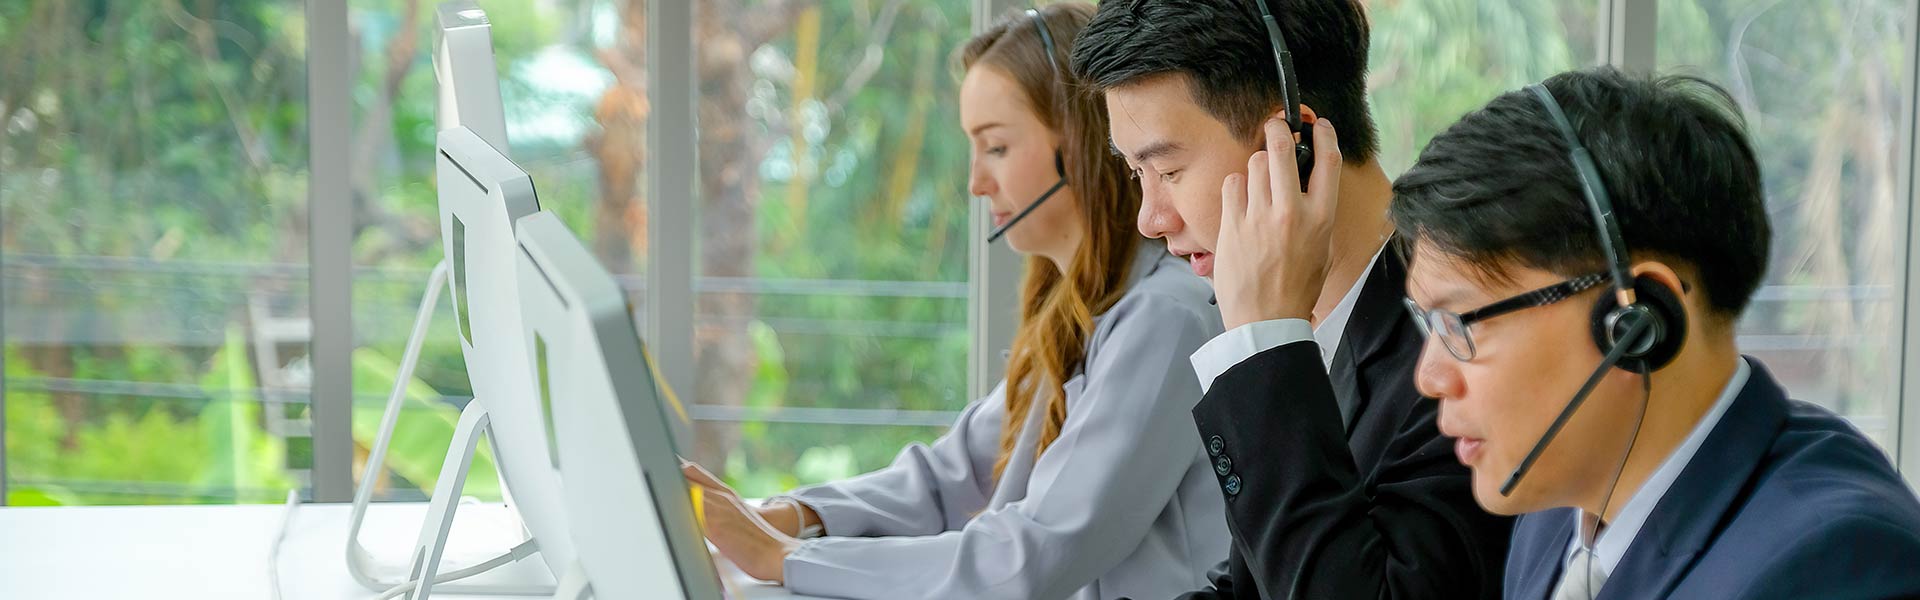 call agents using cloud pbx system to answer calls